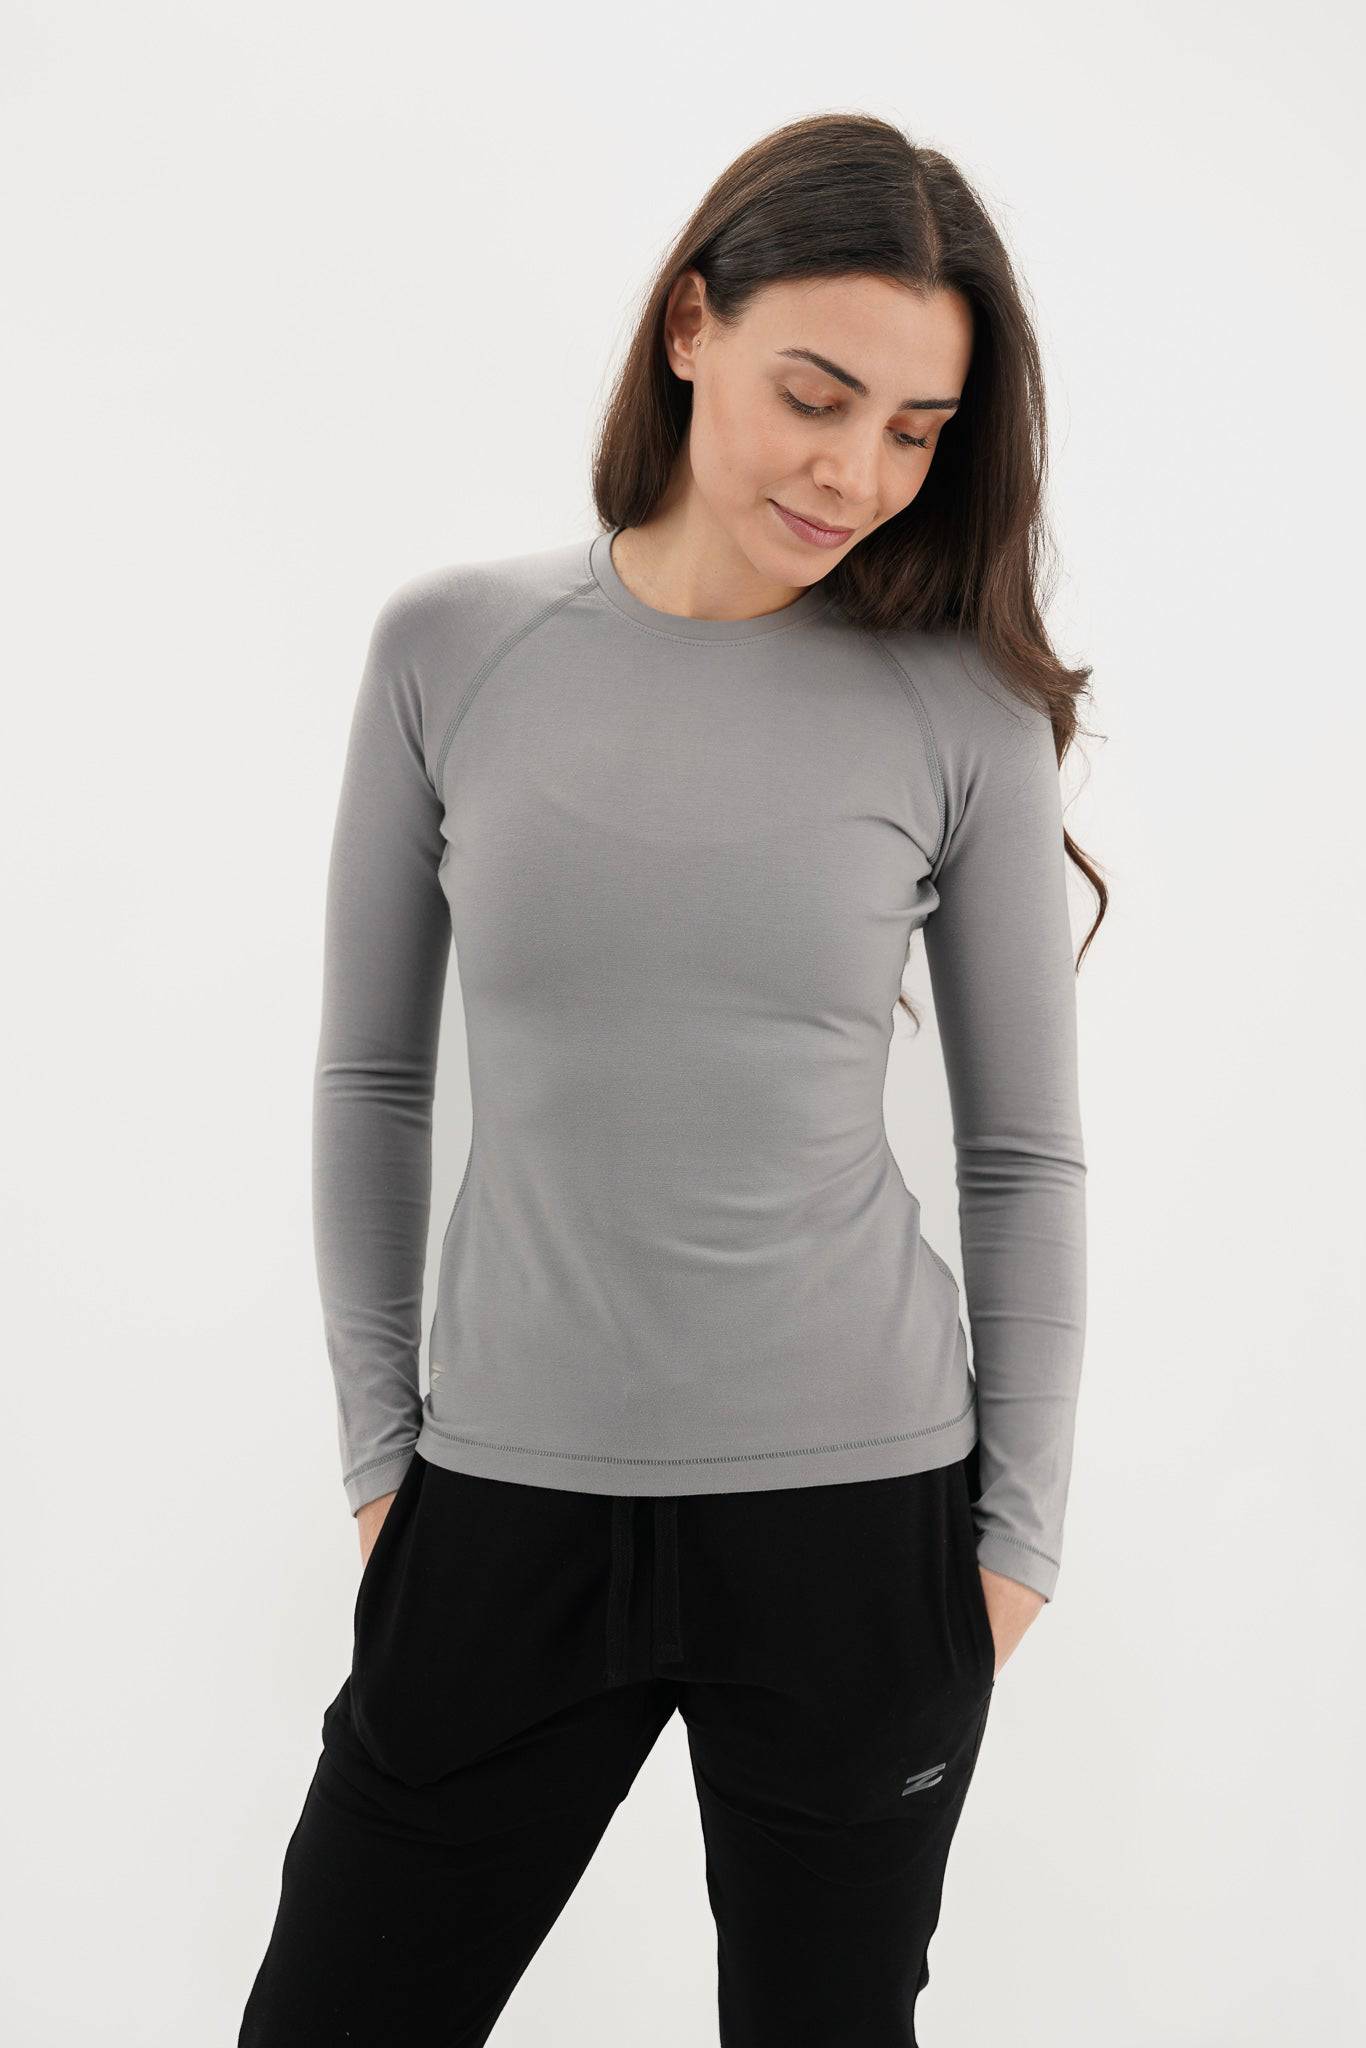 Women's Mid Weight Compression Long Sleeve SALE